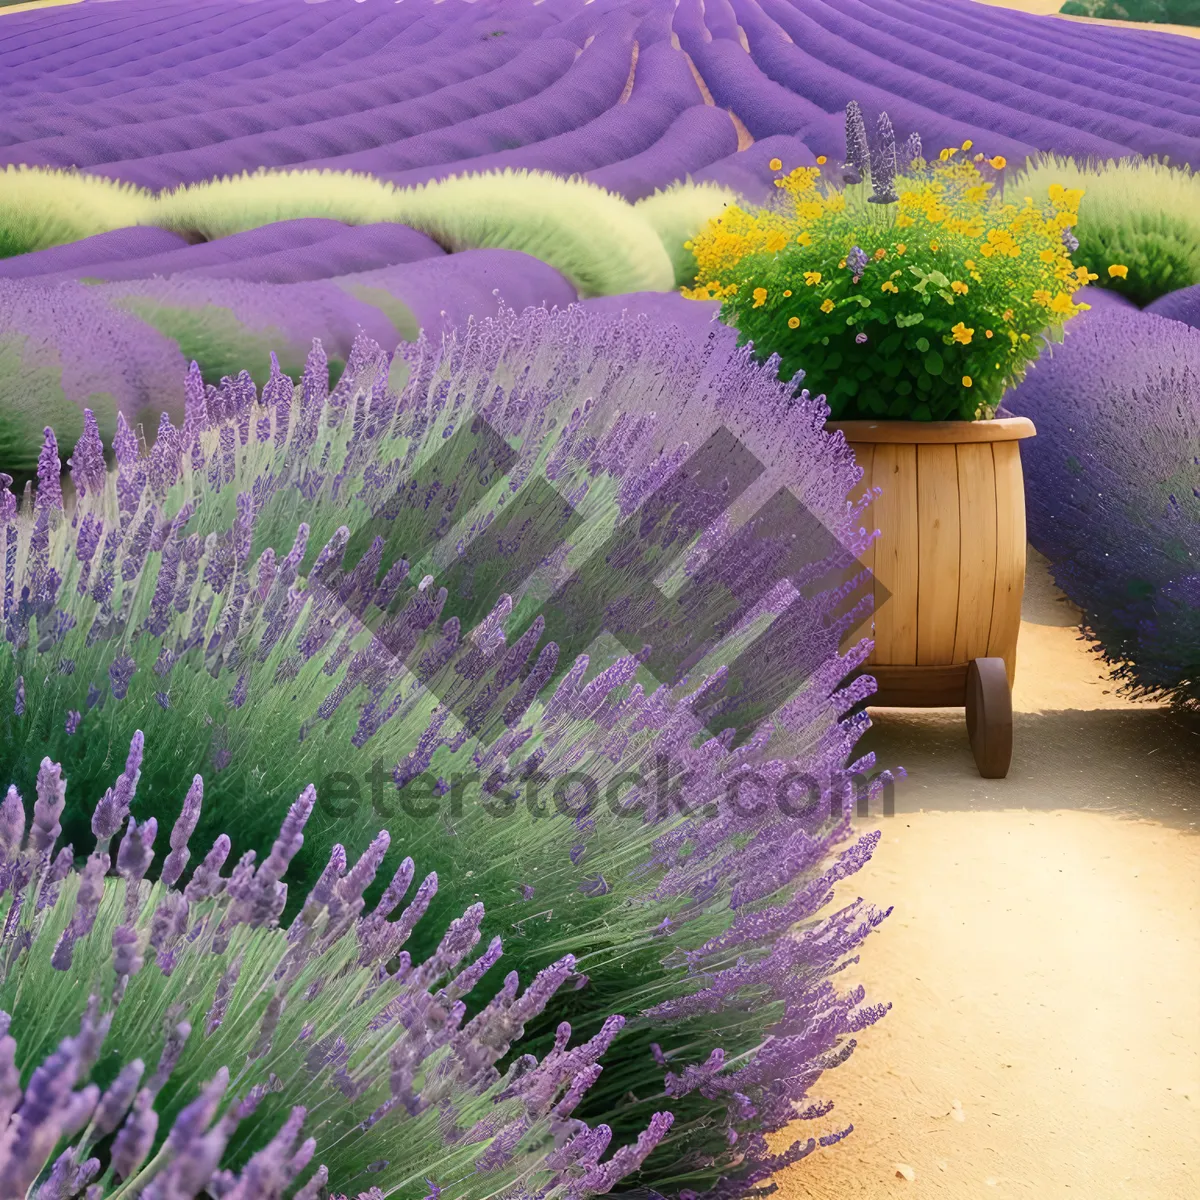 Picture of Colorful Lavender Field in Rural Countryside